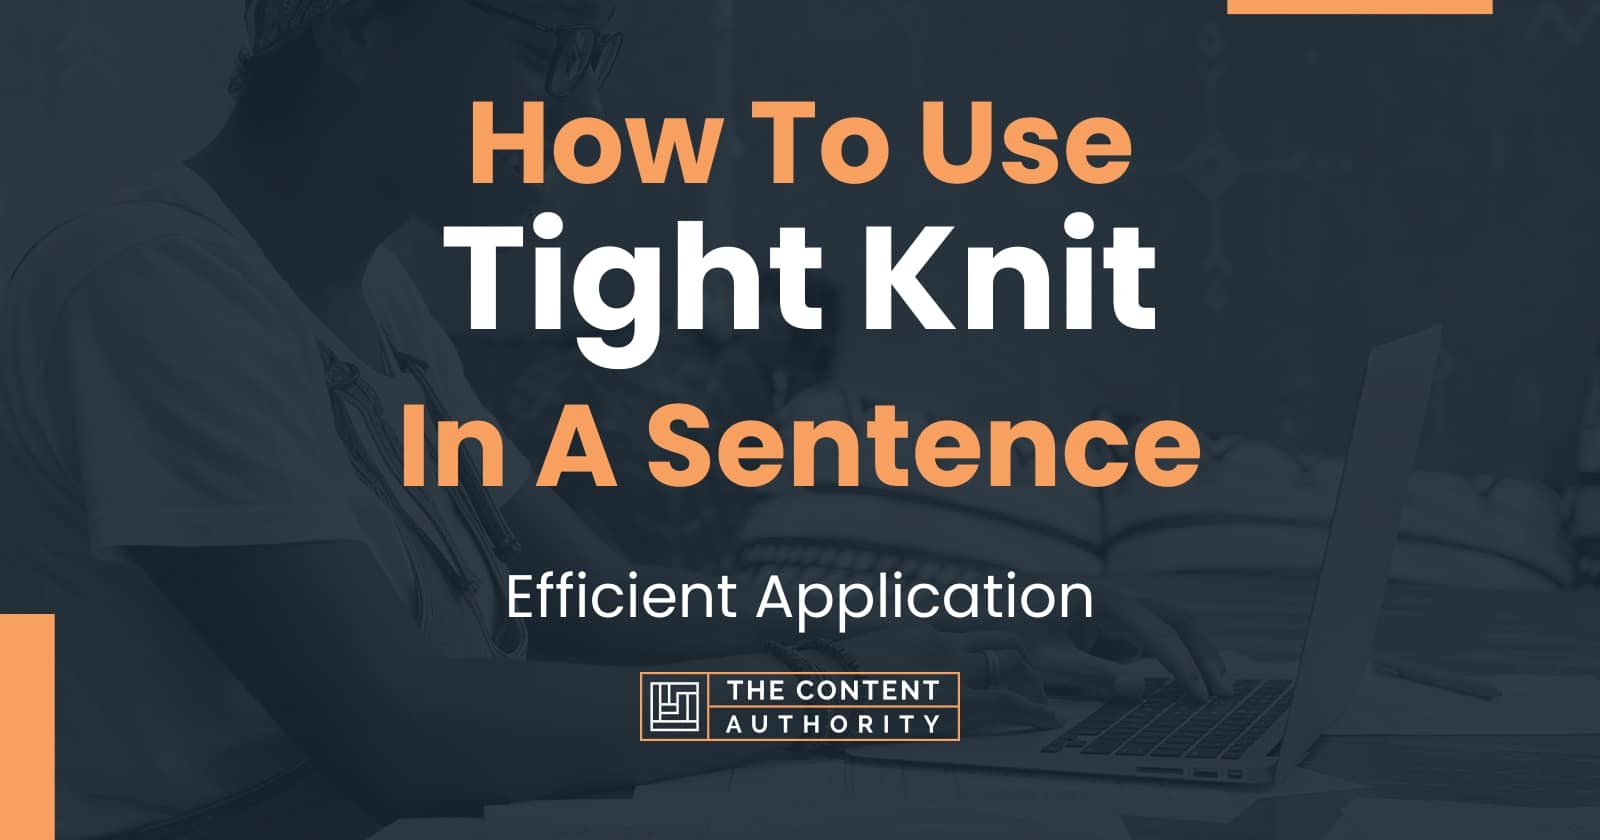 How To Use "Tight Knit" In A Sentence Efficient Application